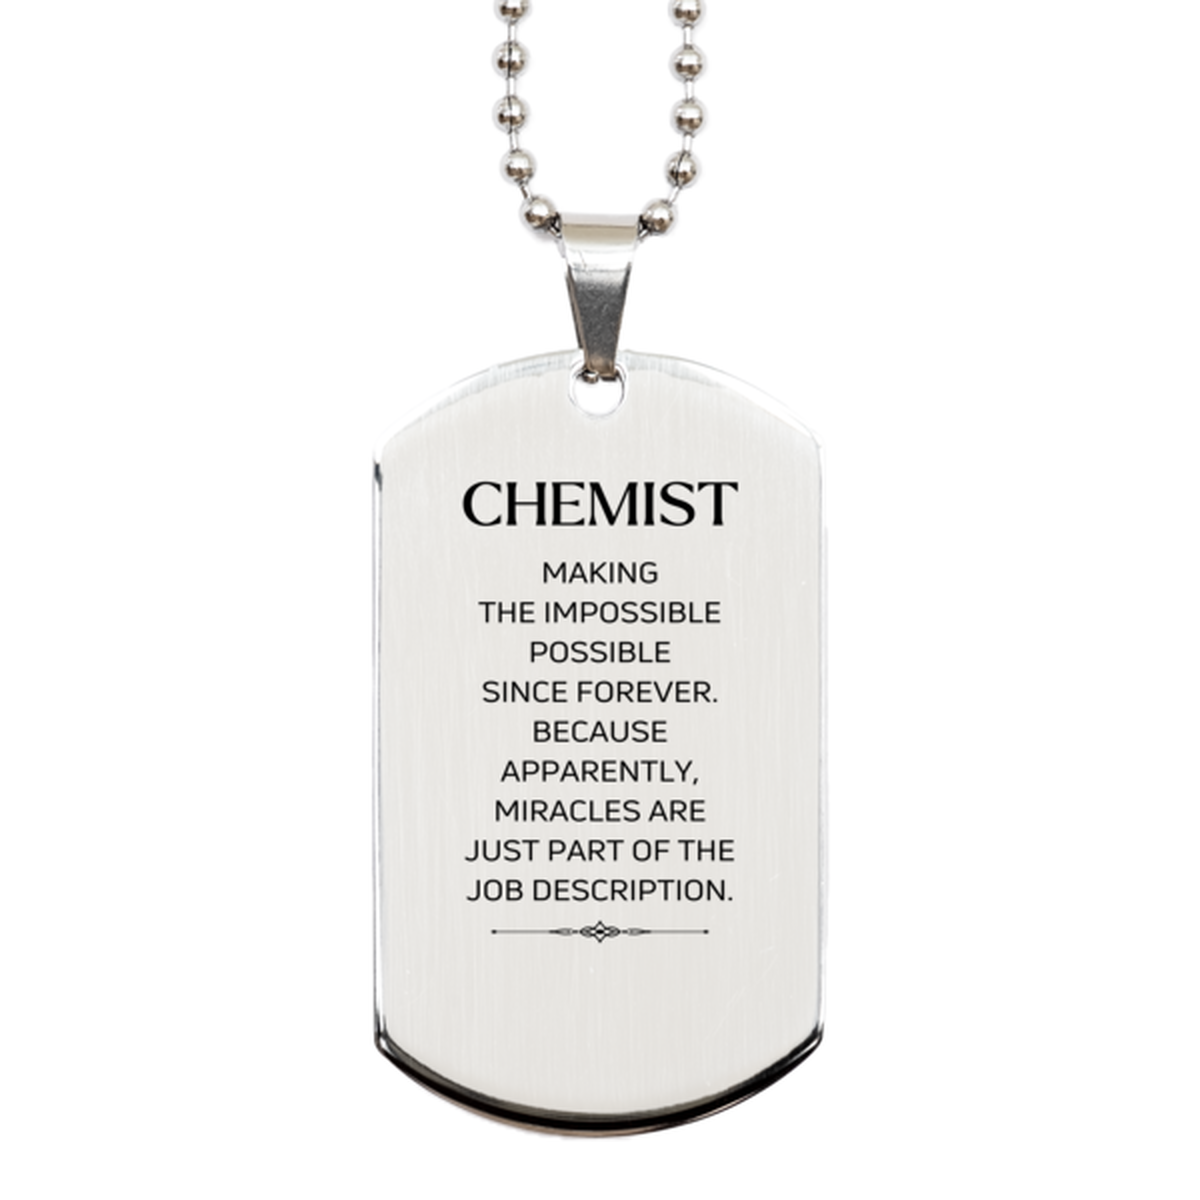 Funny Chemist Gifts, Miracles are just part of the job description, Inspirational Birthday Silver Dog Tag For Chemist, Men, Women, Coworkers, Friends, Boss